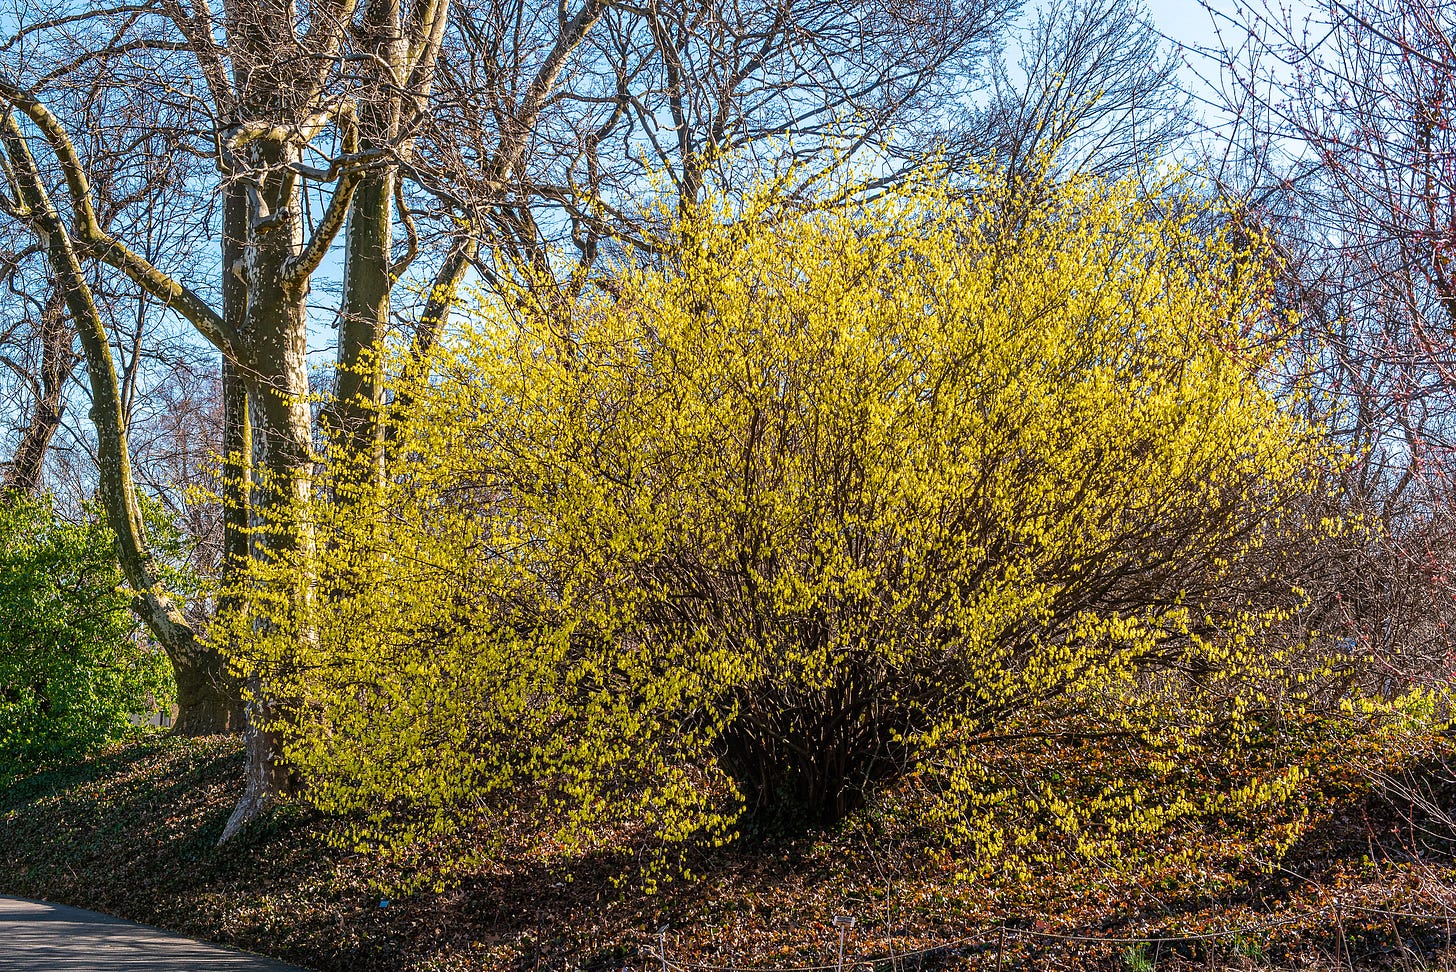 ID: Large yellow multi trunk shrub with yellow flowers